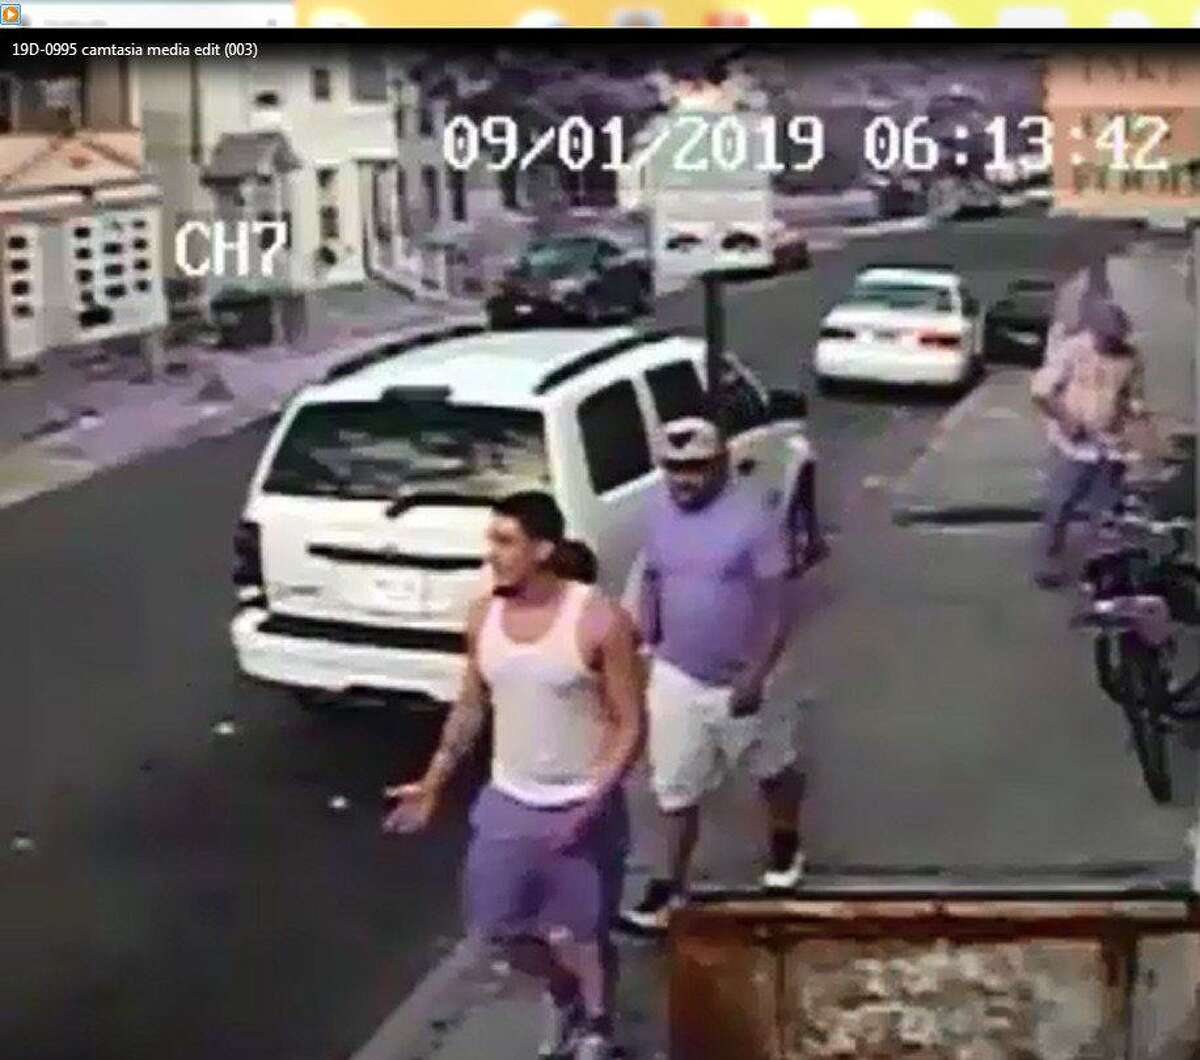 A screenshot from surveillance video released by Bridgeport police Sept. 4, 2019.